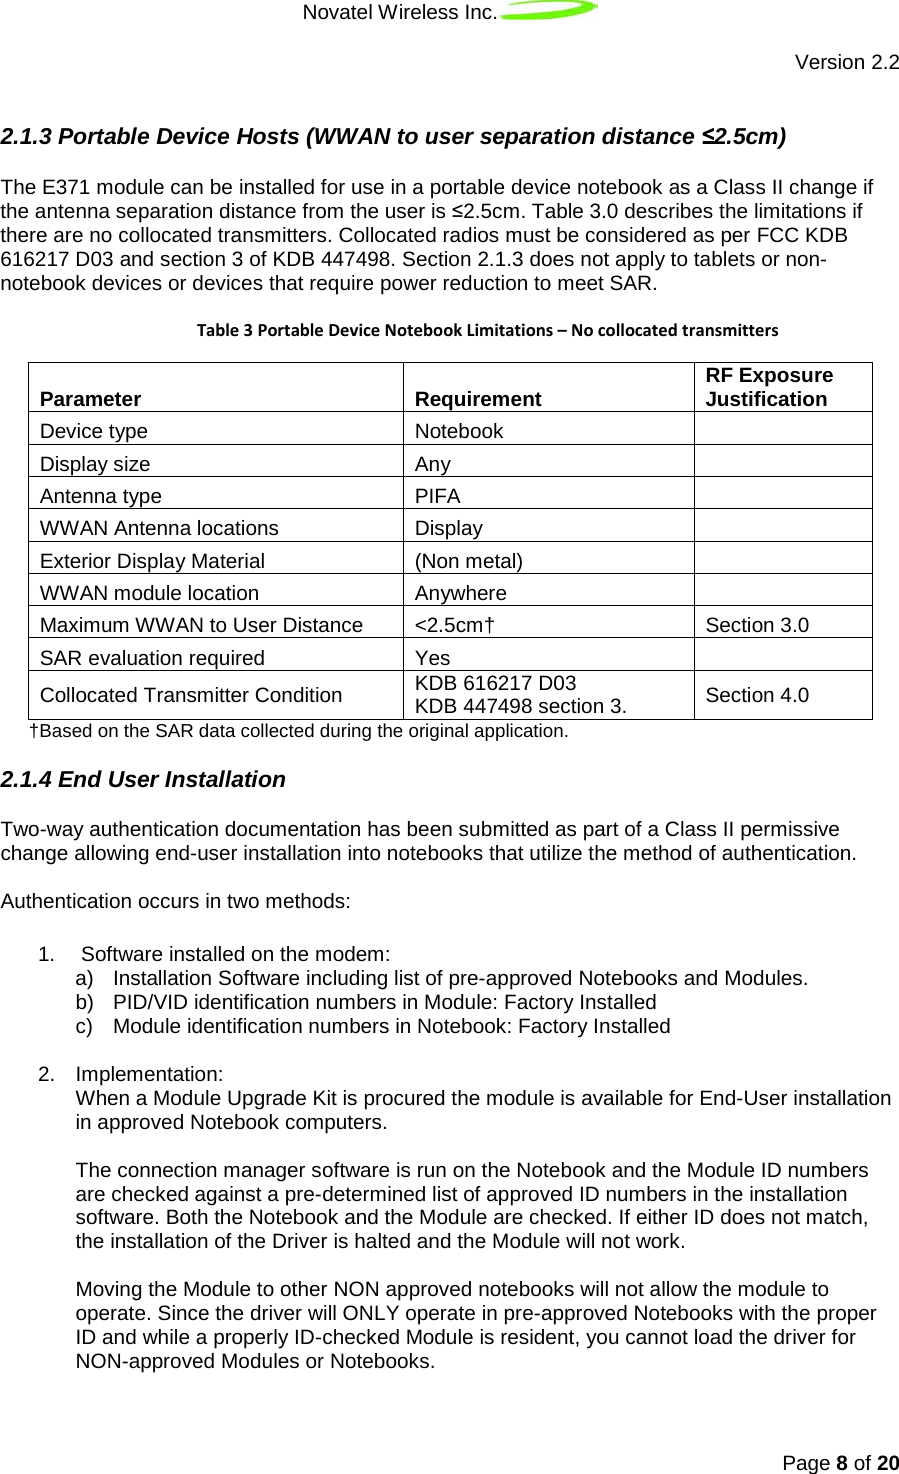 Novatel Wireless Inc.   Version 2.2 Page 8 of 20   2.1.3 Portable Device Hosts (WWAN to user separation distance ≤2.5cm) The E371 module can be installed for use in a portable device notebook as a Class II change if the antenna separation distance from the user is ≤2.5cm. Table 3.0 describes the limitations if there are no collocated transmitters. Collocated radios must be considered as per FCC KDB 616217 D03 and section 3 of KDB 447498. Section 2.1.3 does not apply to tablets or non-notebook devices or devices that require power reduction to meet SAR.    Table 3 Portable Device Notebook Limitations – No collocated transmitters Parameter Requirement RF Exposure Justification Device type Notebook  Display size Any  Antenna type PIFA  WWAN Antenna locations Display  Exterior Display Material (Non metal)  WWAN module location Anywhere  Maximum WWAN to User Distance &lt;2.5cm† Section 3.0 SAR evaluation required Yes  Collocated Transmitter Condition KDB 616217 D03 KDB 447498 section 3. Section 4.0 †Based on the SAR data collected during the original application. 2.1.4 End User Installation Two-way authentication documentation has been submitted as part of a Class II permissive change allowing end-user installation into notebooks that utilize the method of authentication.   Authentication occurs in two methods:  1.   Software installed on the modem:  a) Installation Software including list of pre-approved Notebooks and Modules.  b) PID/VID identification numbers in Module: Factory Installed  c) Module identification numbers in Notebook: Factory Installed   2. Implementation: When a Module Upgrade Kit is procured the module is available for End-User installation in approved Notebook computers.   The connection manager software is run on the Notebook and the Module ID numbers are checked against a pre-determined list of approved ID numbers in the installation software. Both the Notebook and the Module are checked. If either ID does not match, the installation of the Driver is halted and the Module will not work.   Moving the Module to other NON approved notebooks will not allow the module to operate. Since the driver will ONLY operate in pre-approved Notebooks with the proper ID and while a properly ID-checked Module is resident, you cannot load the driver for NON-approved Modules or Notebooks.   